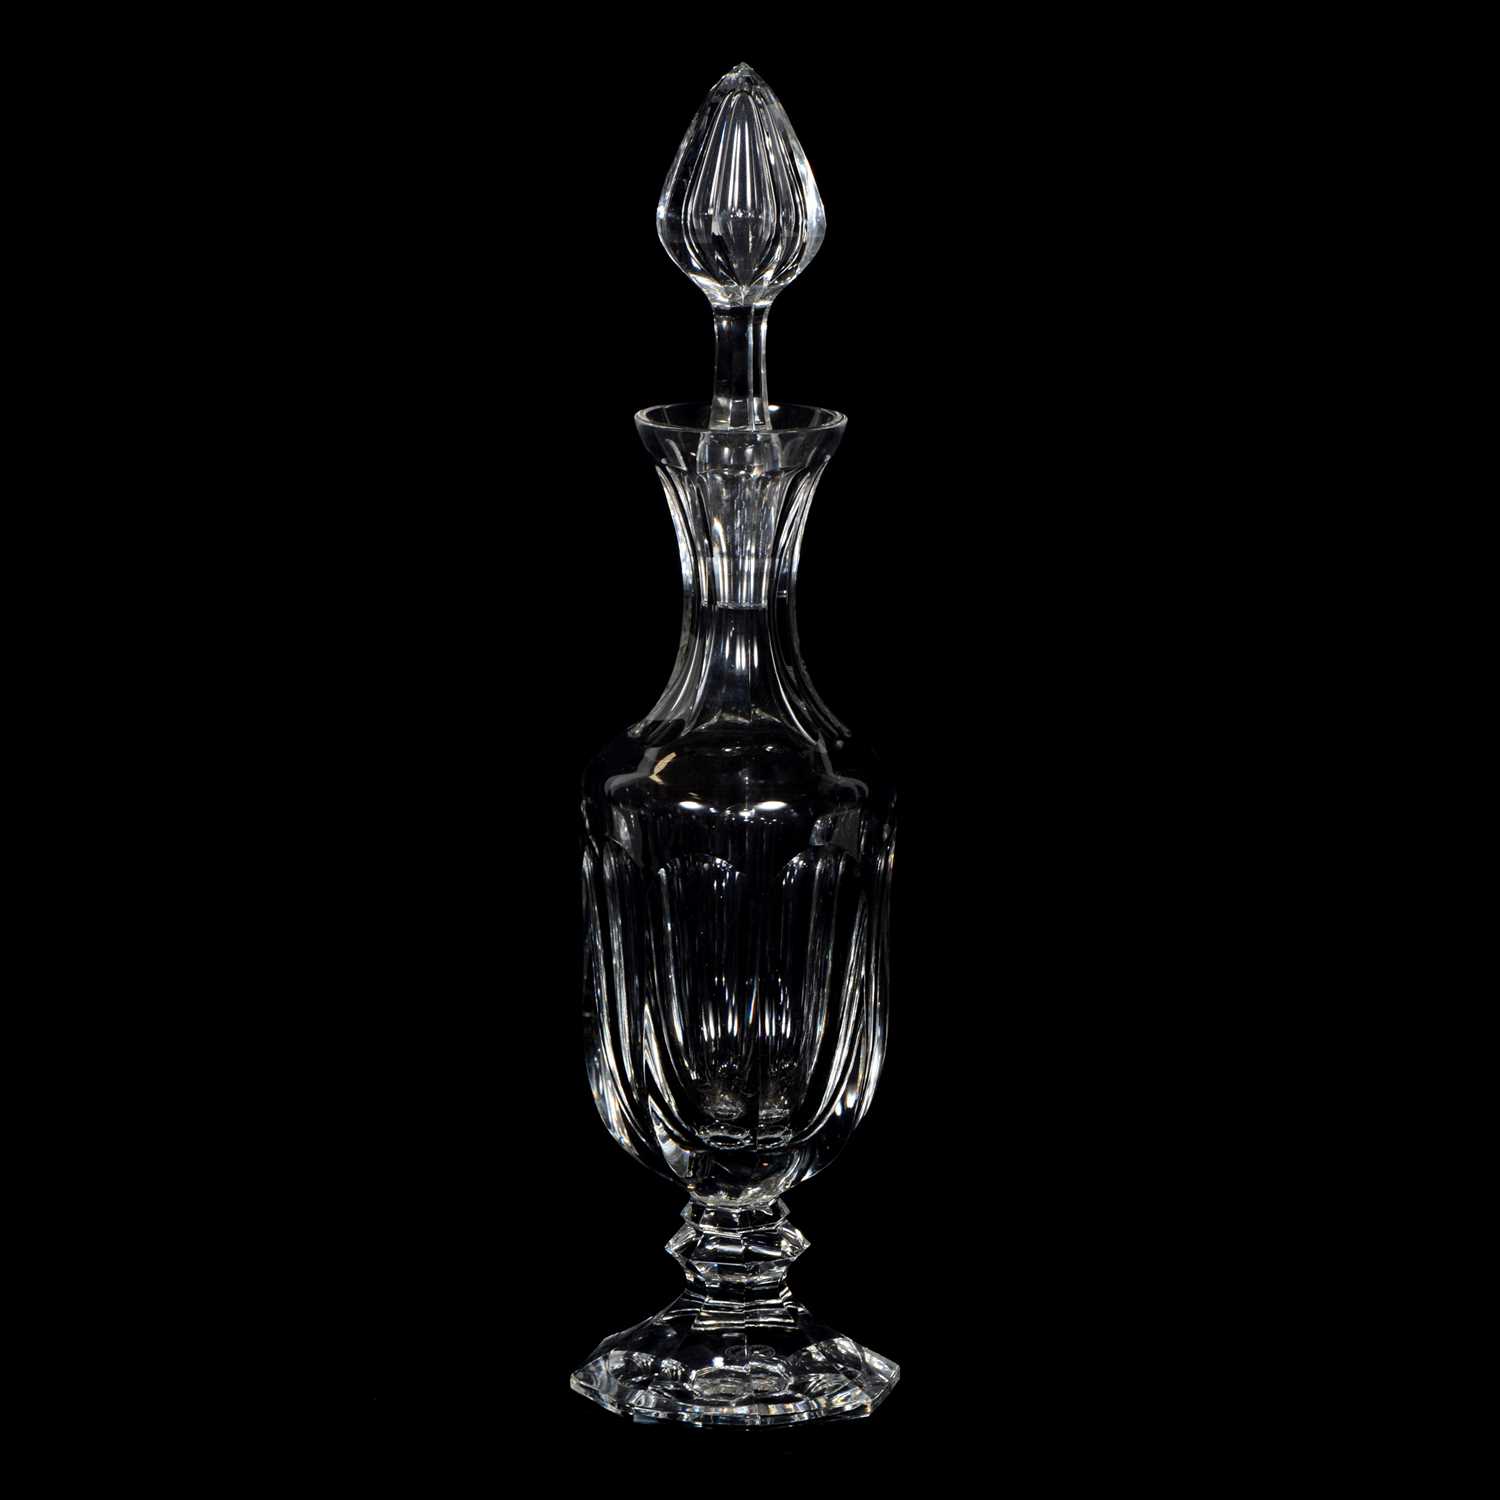 Lot 84 - Lead crystal glass decanter, St Louis, France